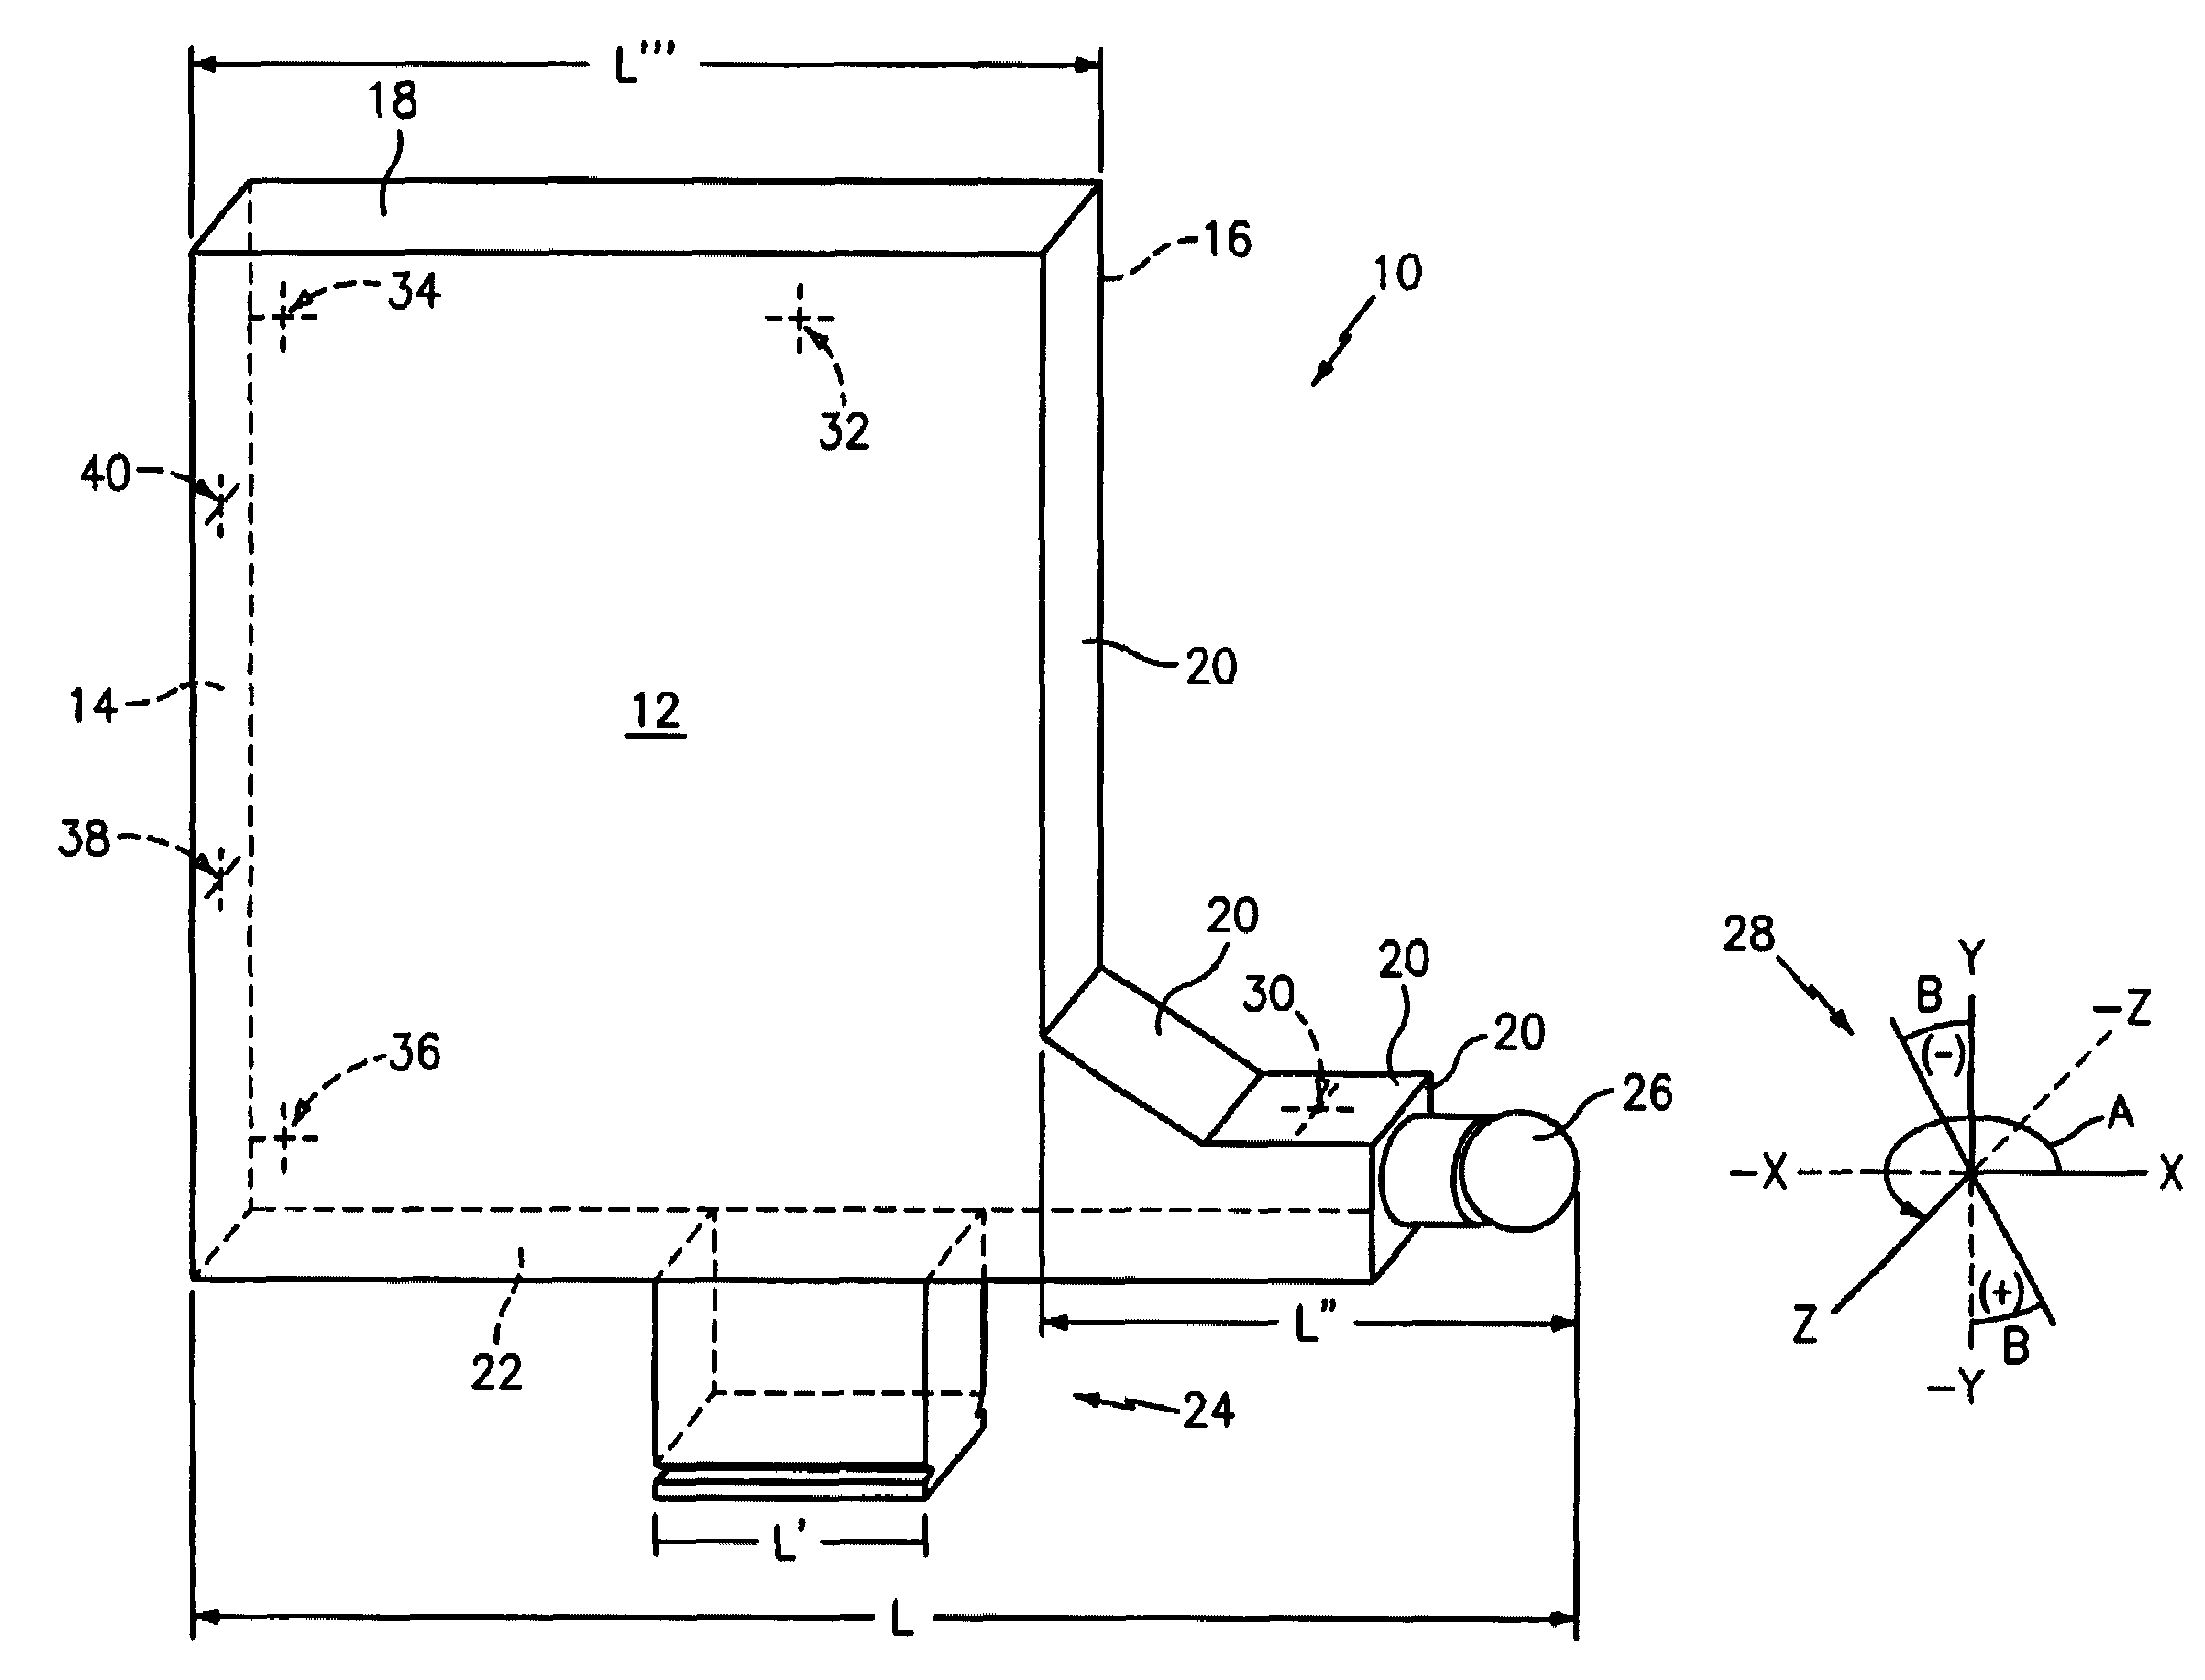 Method for certifying and calibrating multi-axis positioning coordinate measuring machines